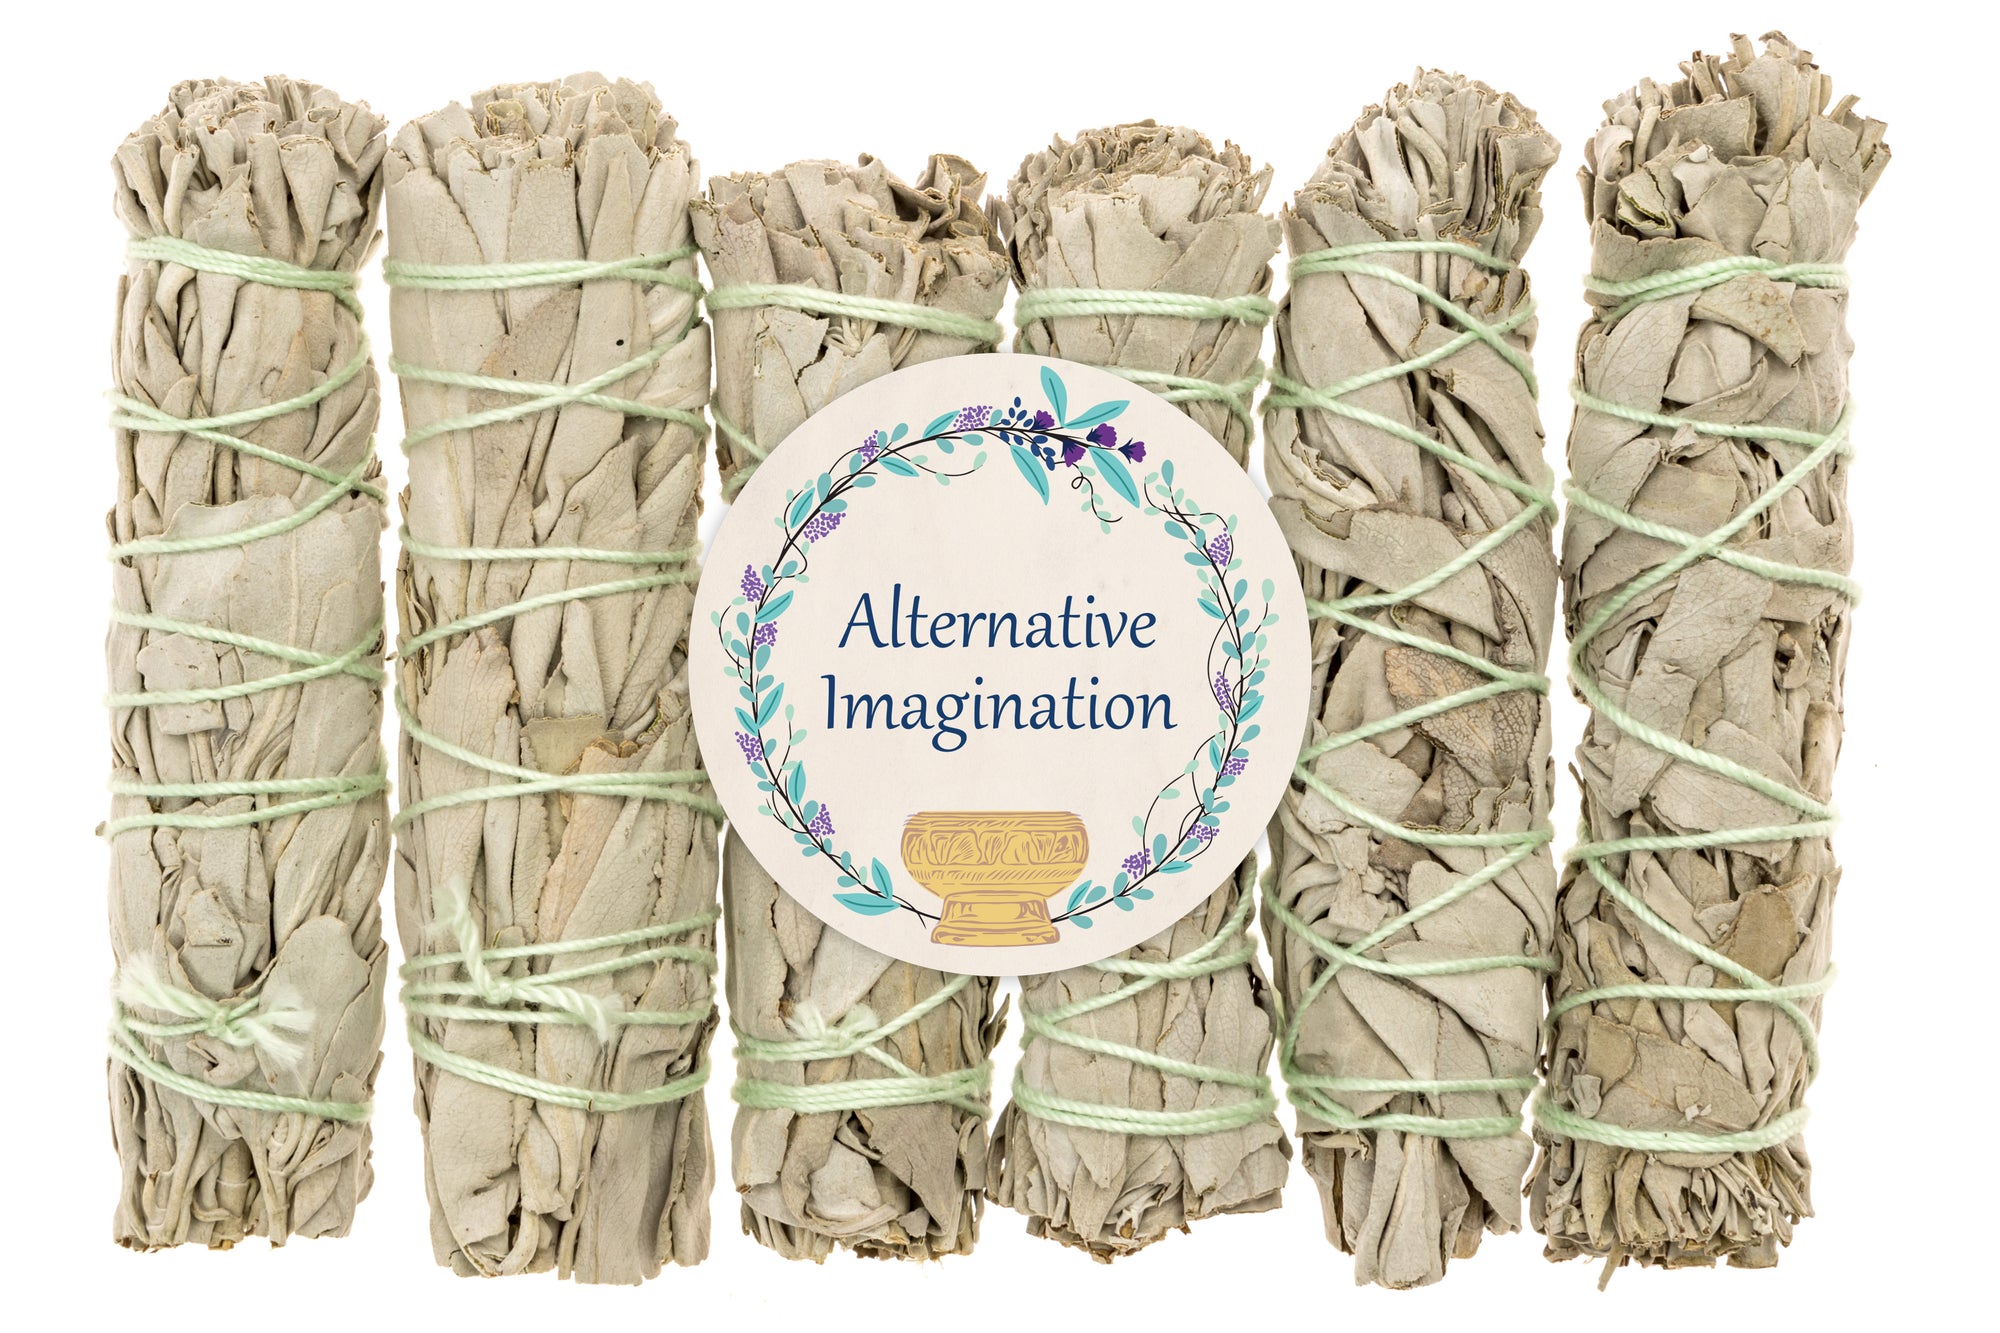 Premium California White Sage 4 Inch Smudge Sticks - 3 Pack For Home Cleansing, Fragrance, Meditation, Smudging Rituals. Packaged with Care in the USA